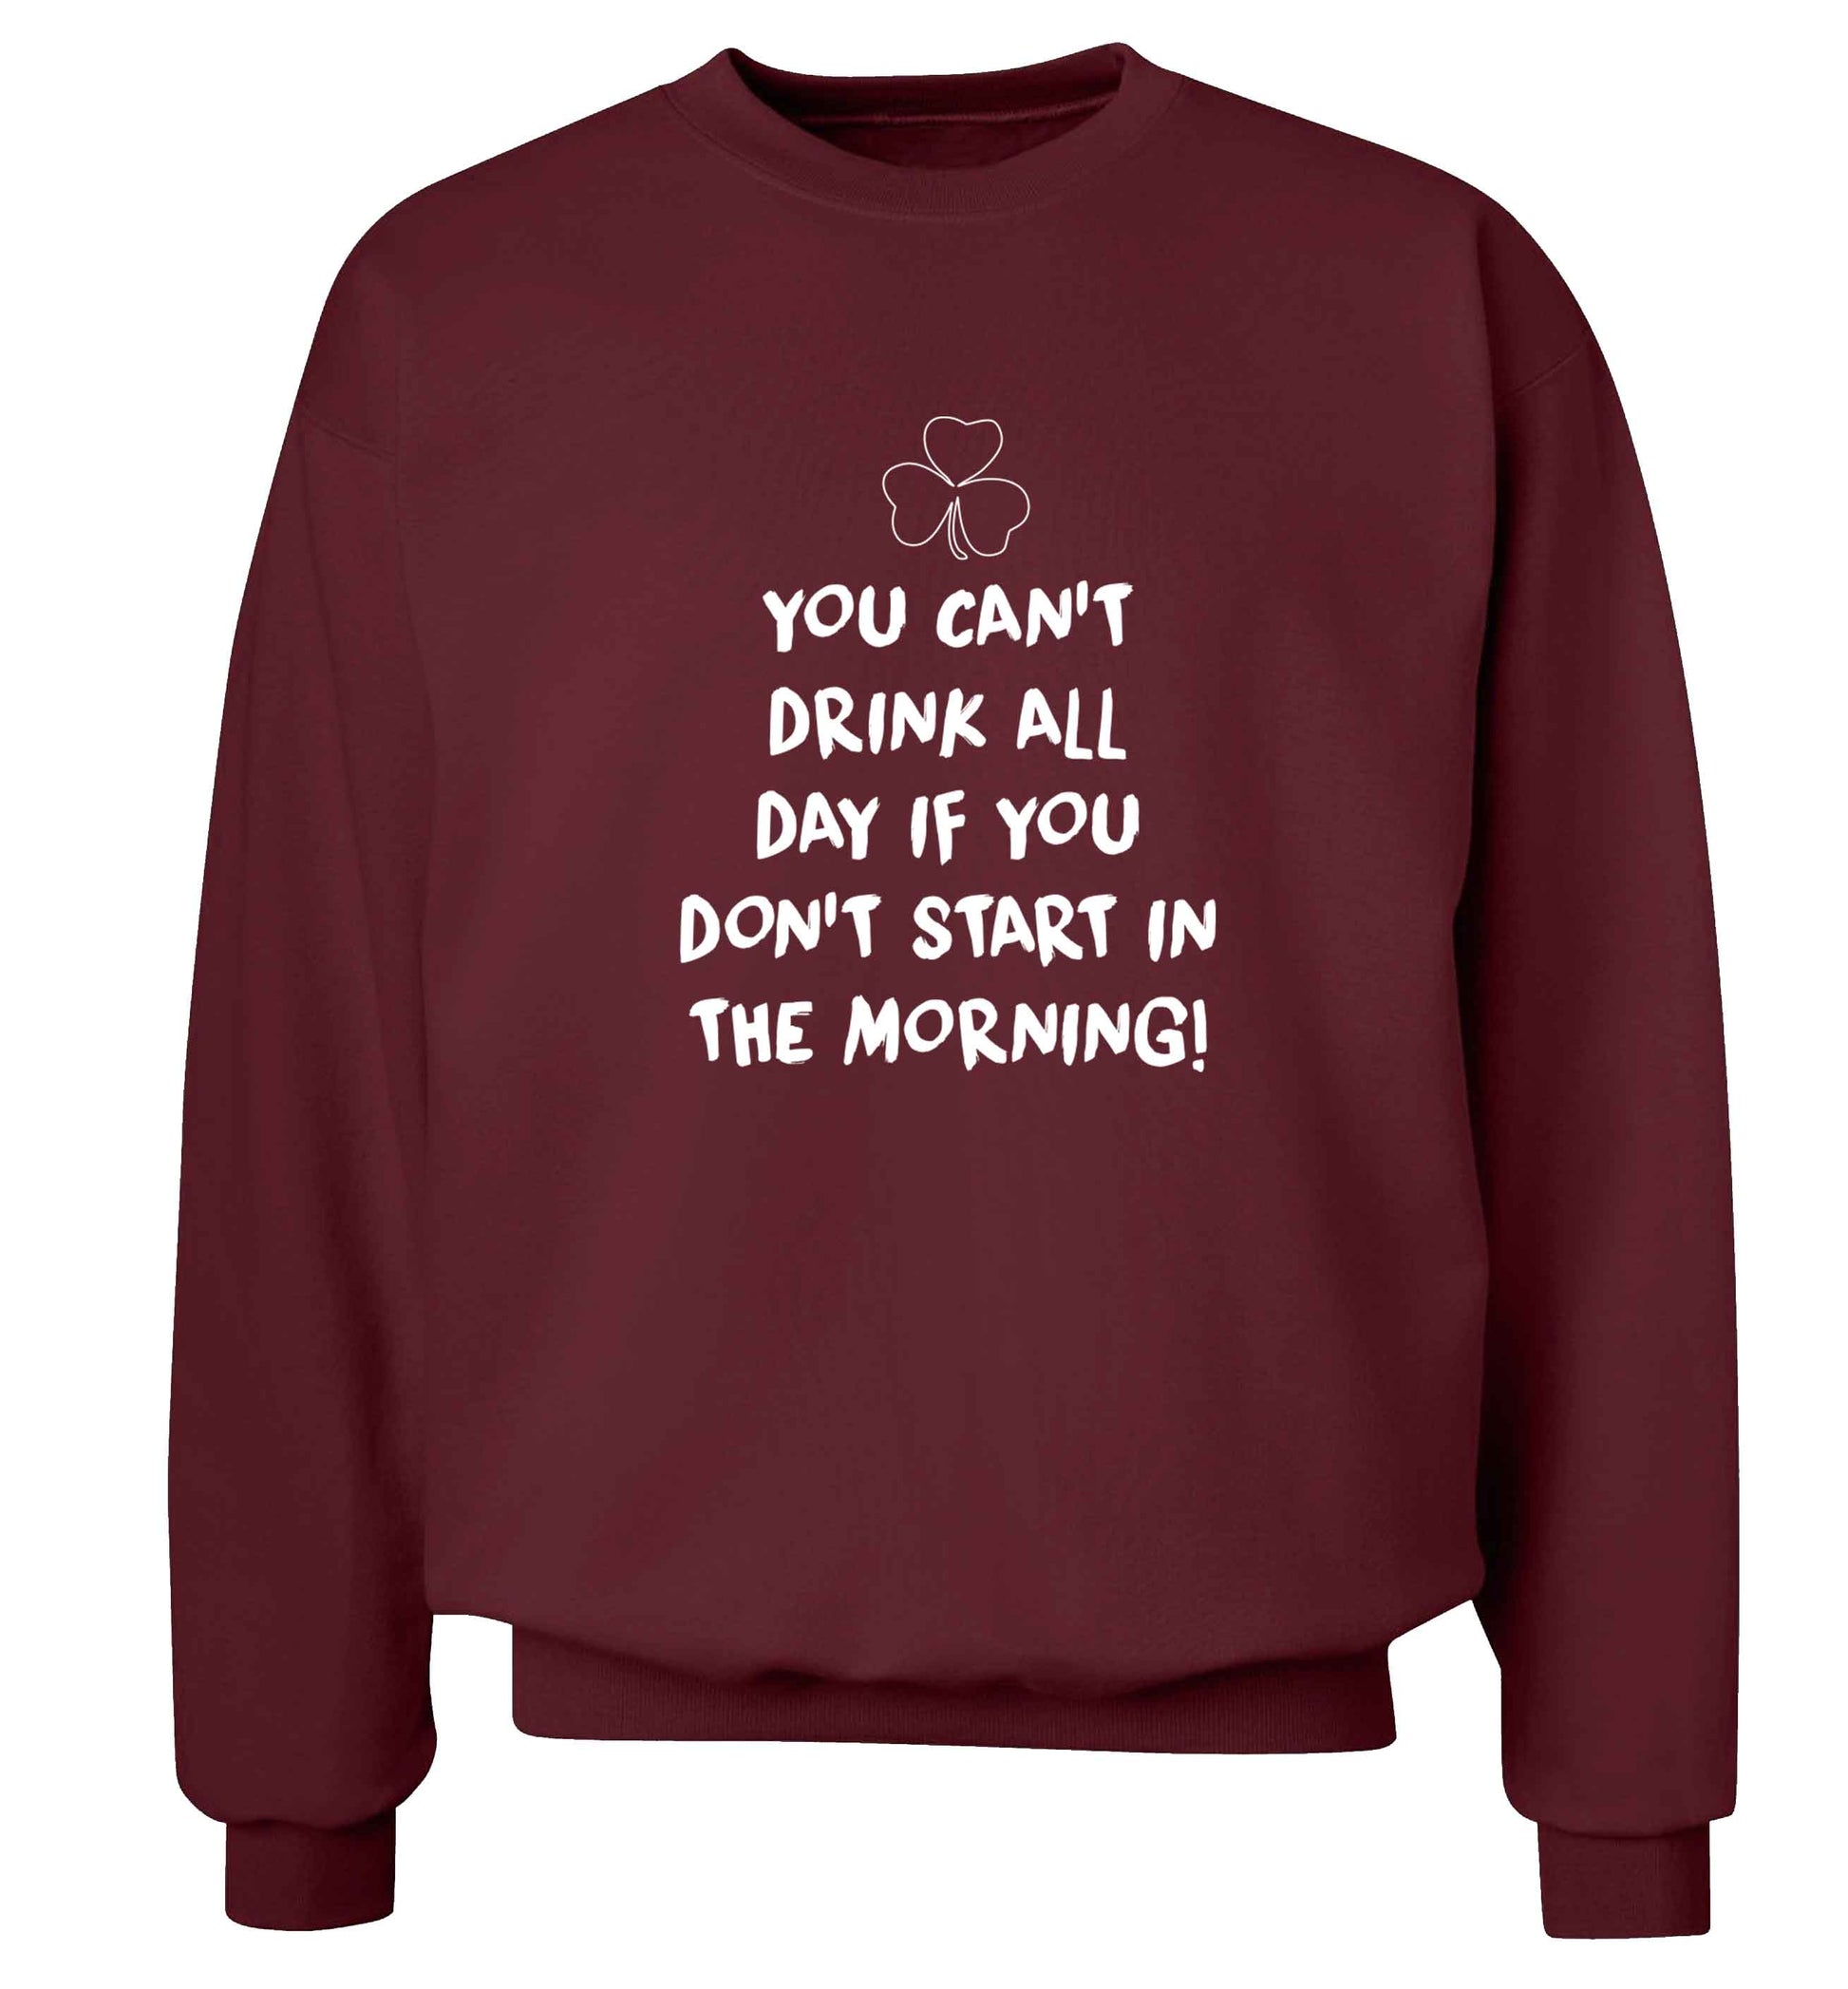 You can't drink all day if you don't start in the morning adult's unisex maroon sweater 2XL